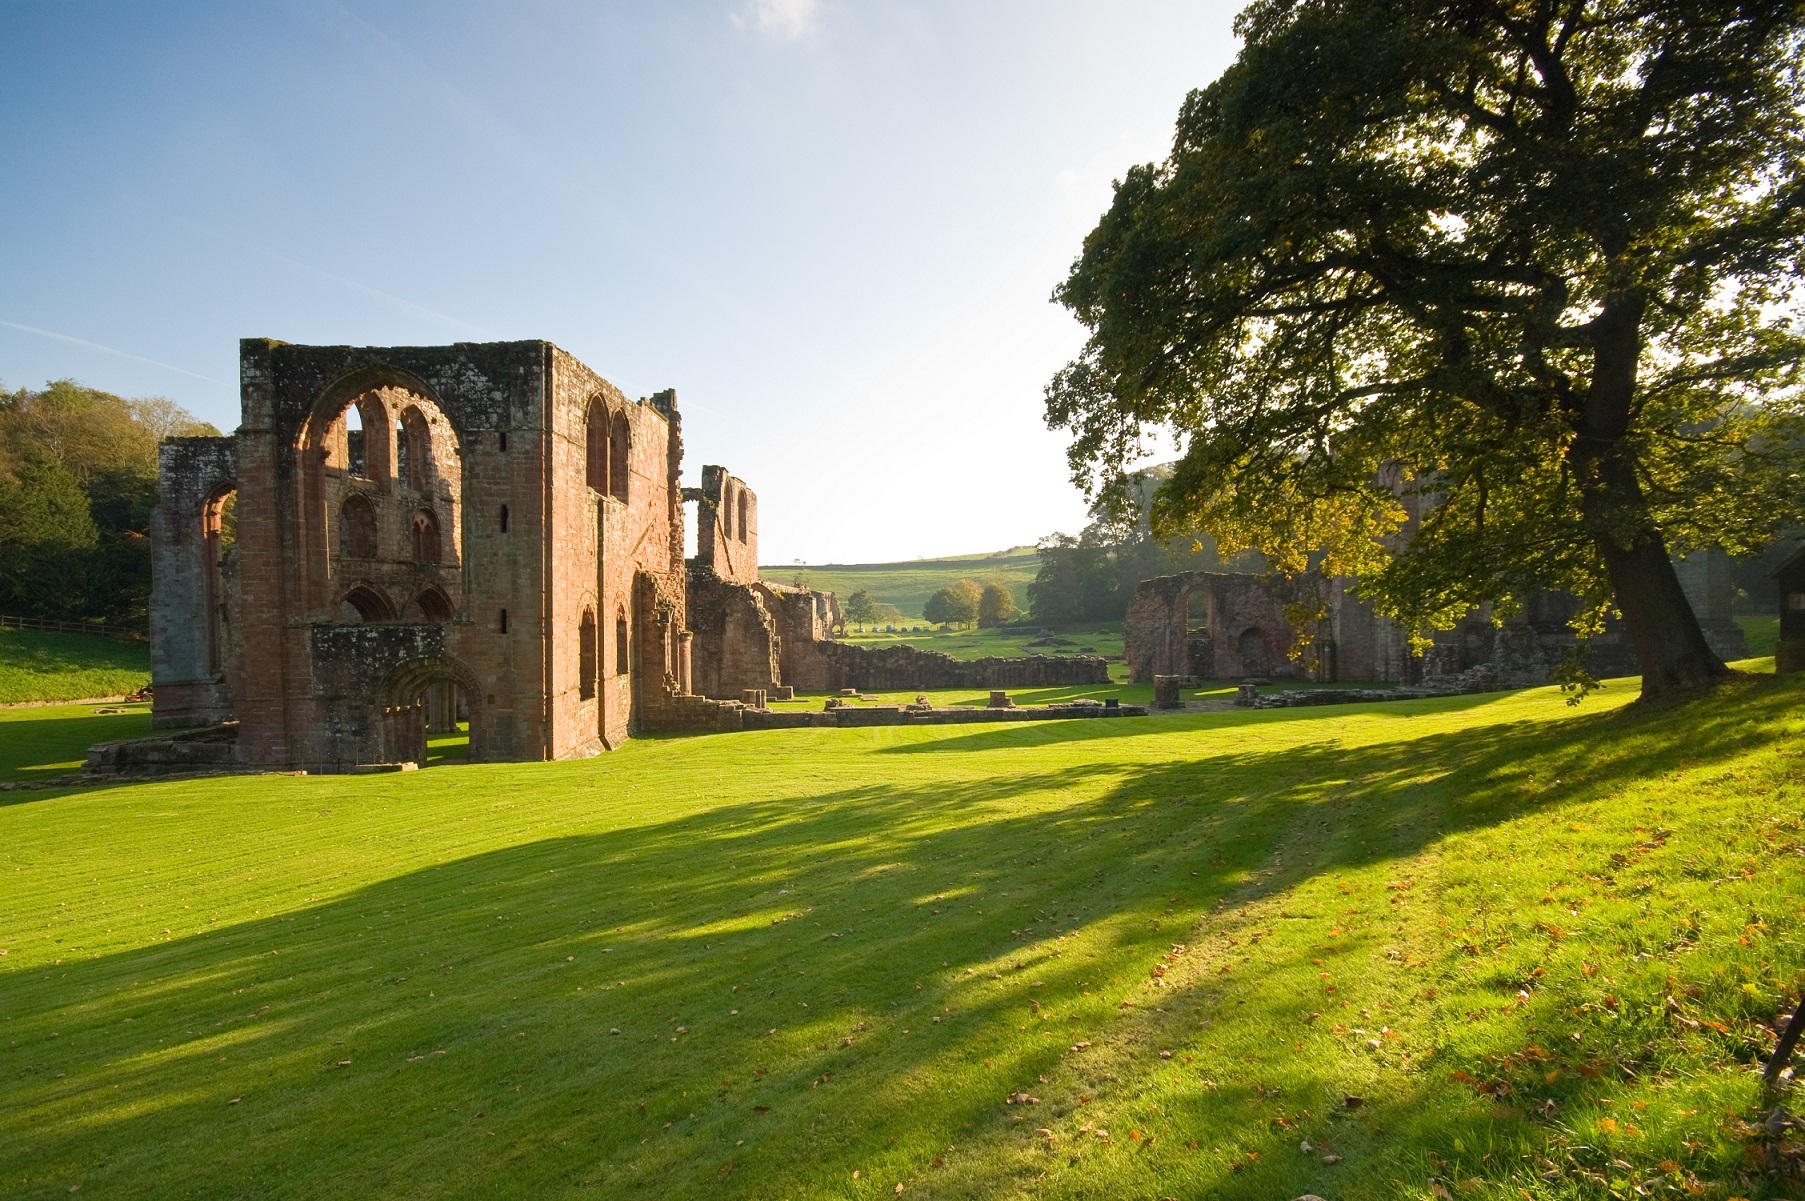 CUMBRIA: Furness Abbey, one of the most visited spots in Barrow-in-Furness